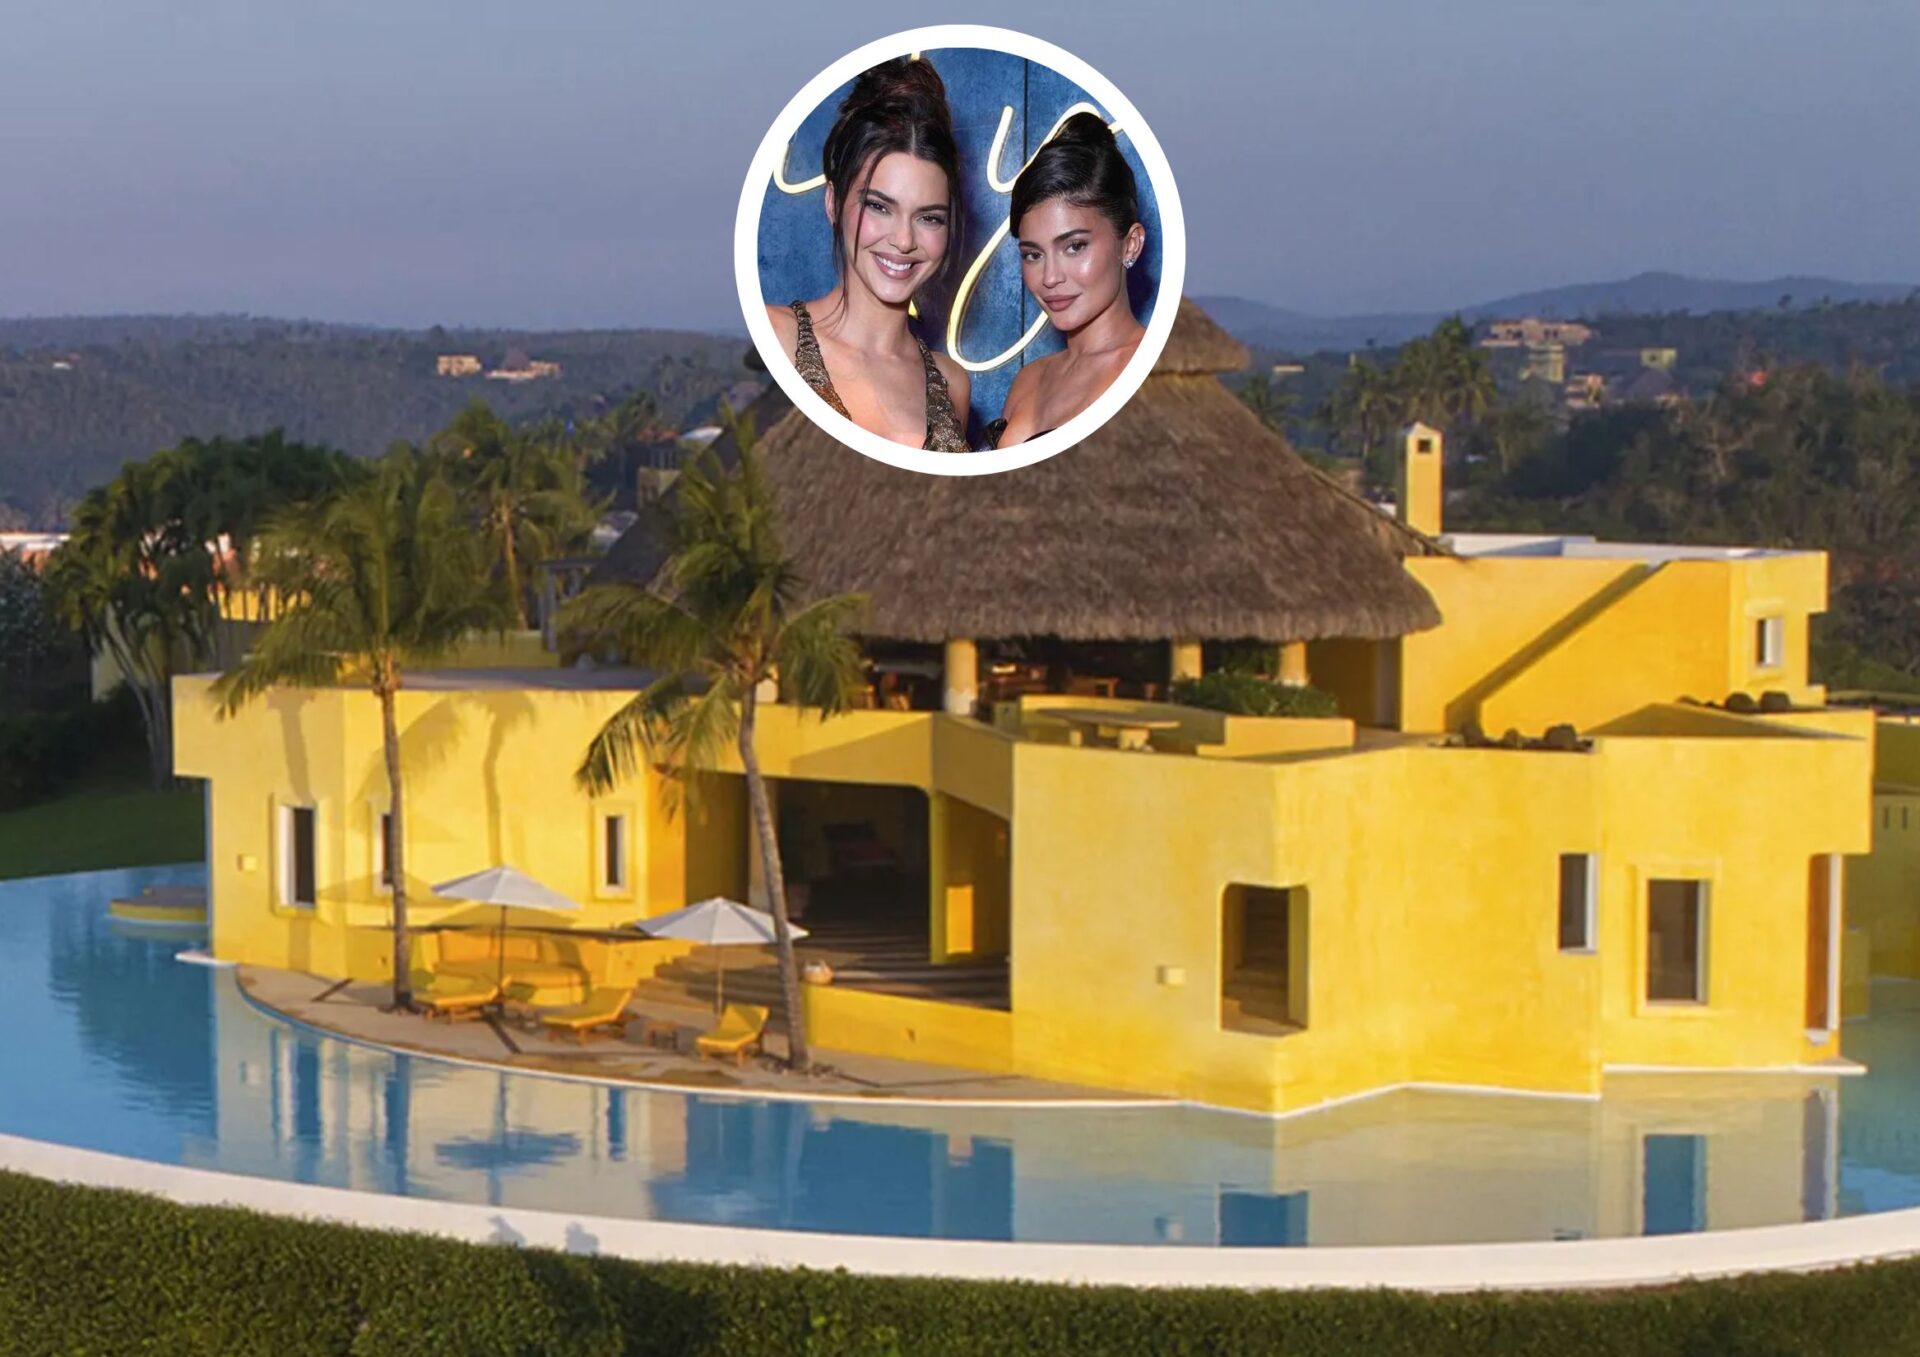 Kylie and Kendall Villa in Costa Careyes